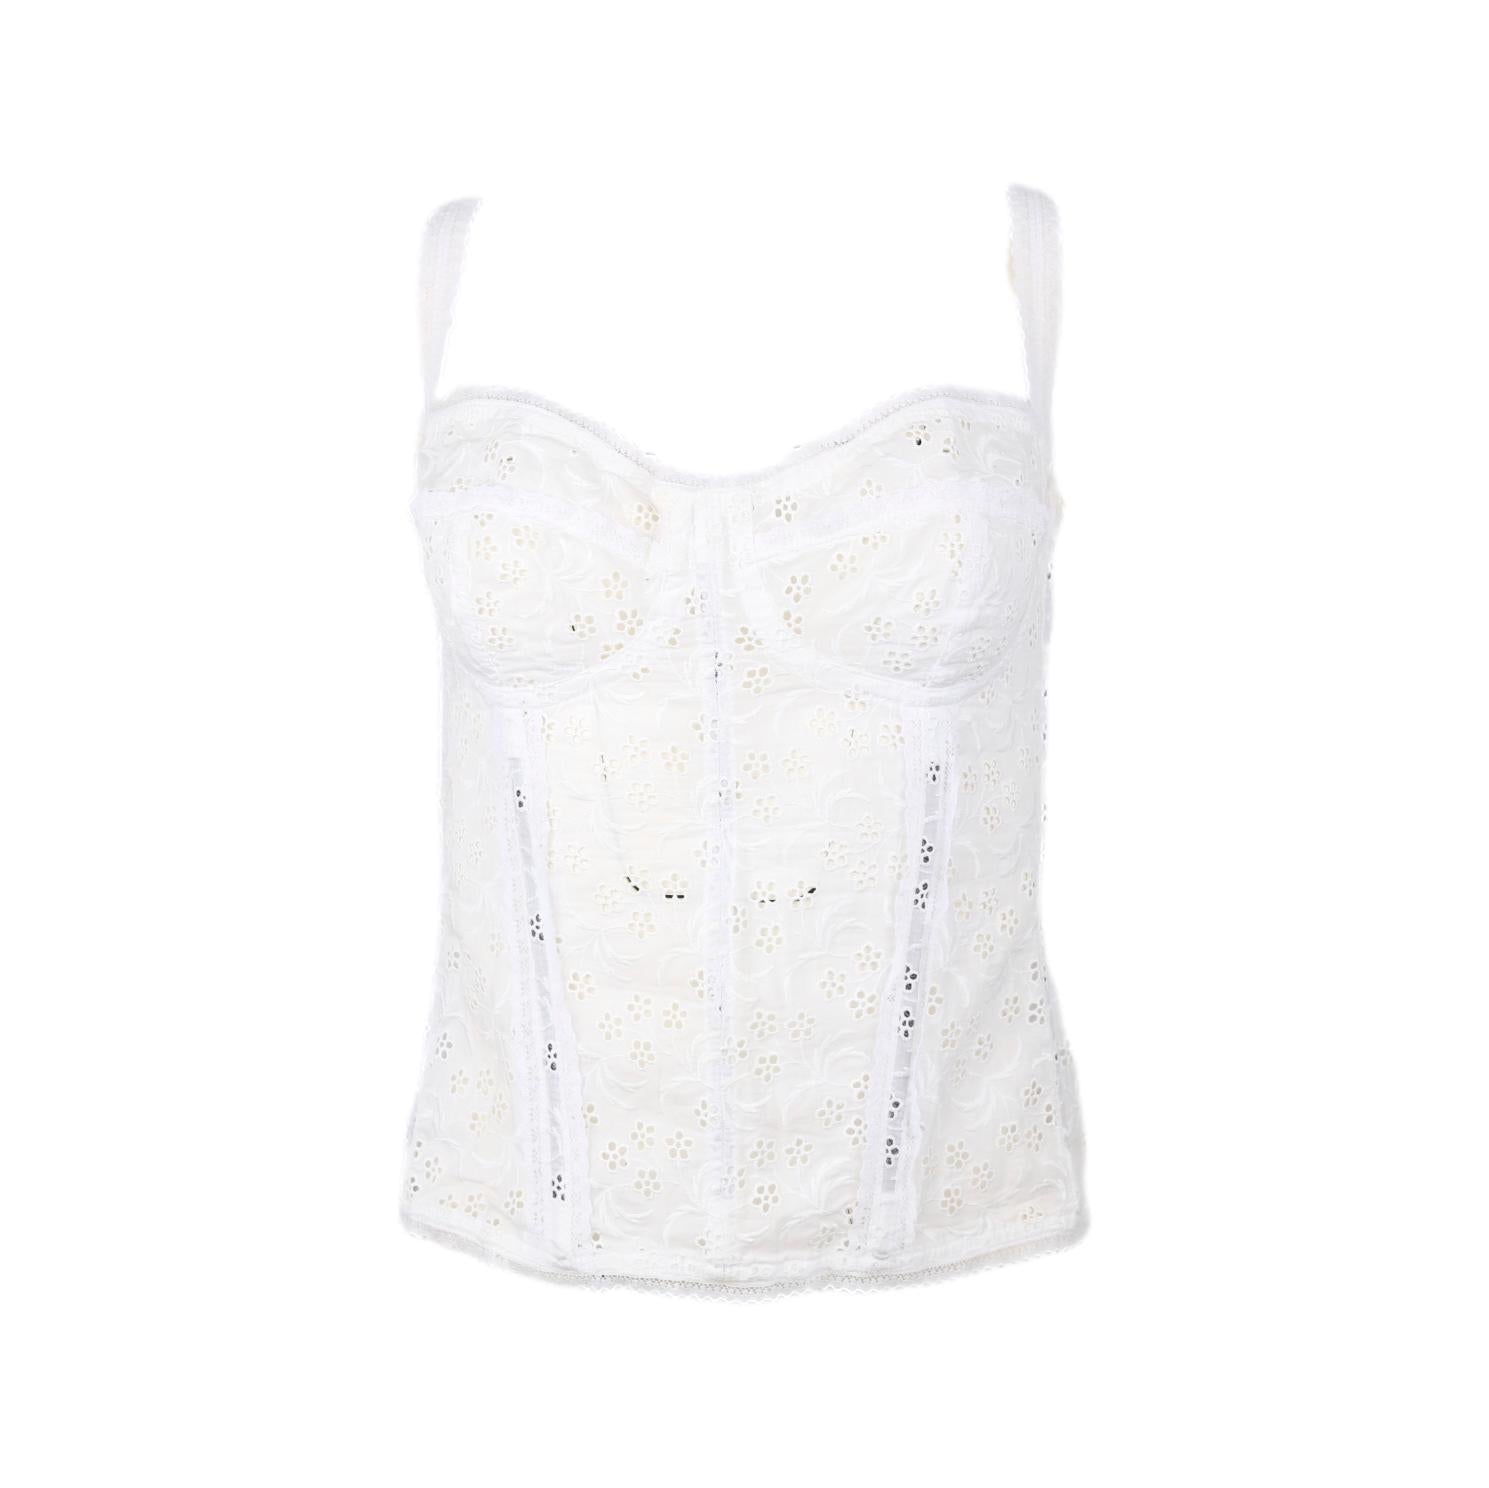 Dolce and Gabbana White Floral Corset - Apparel